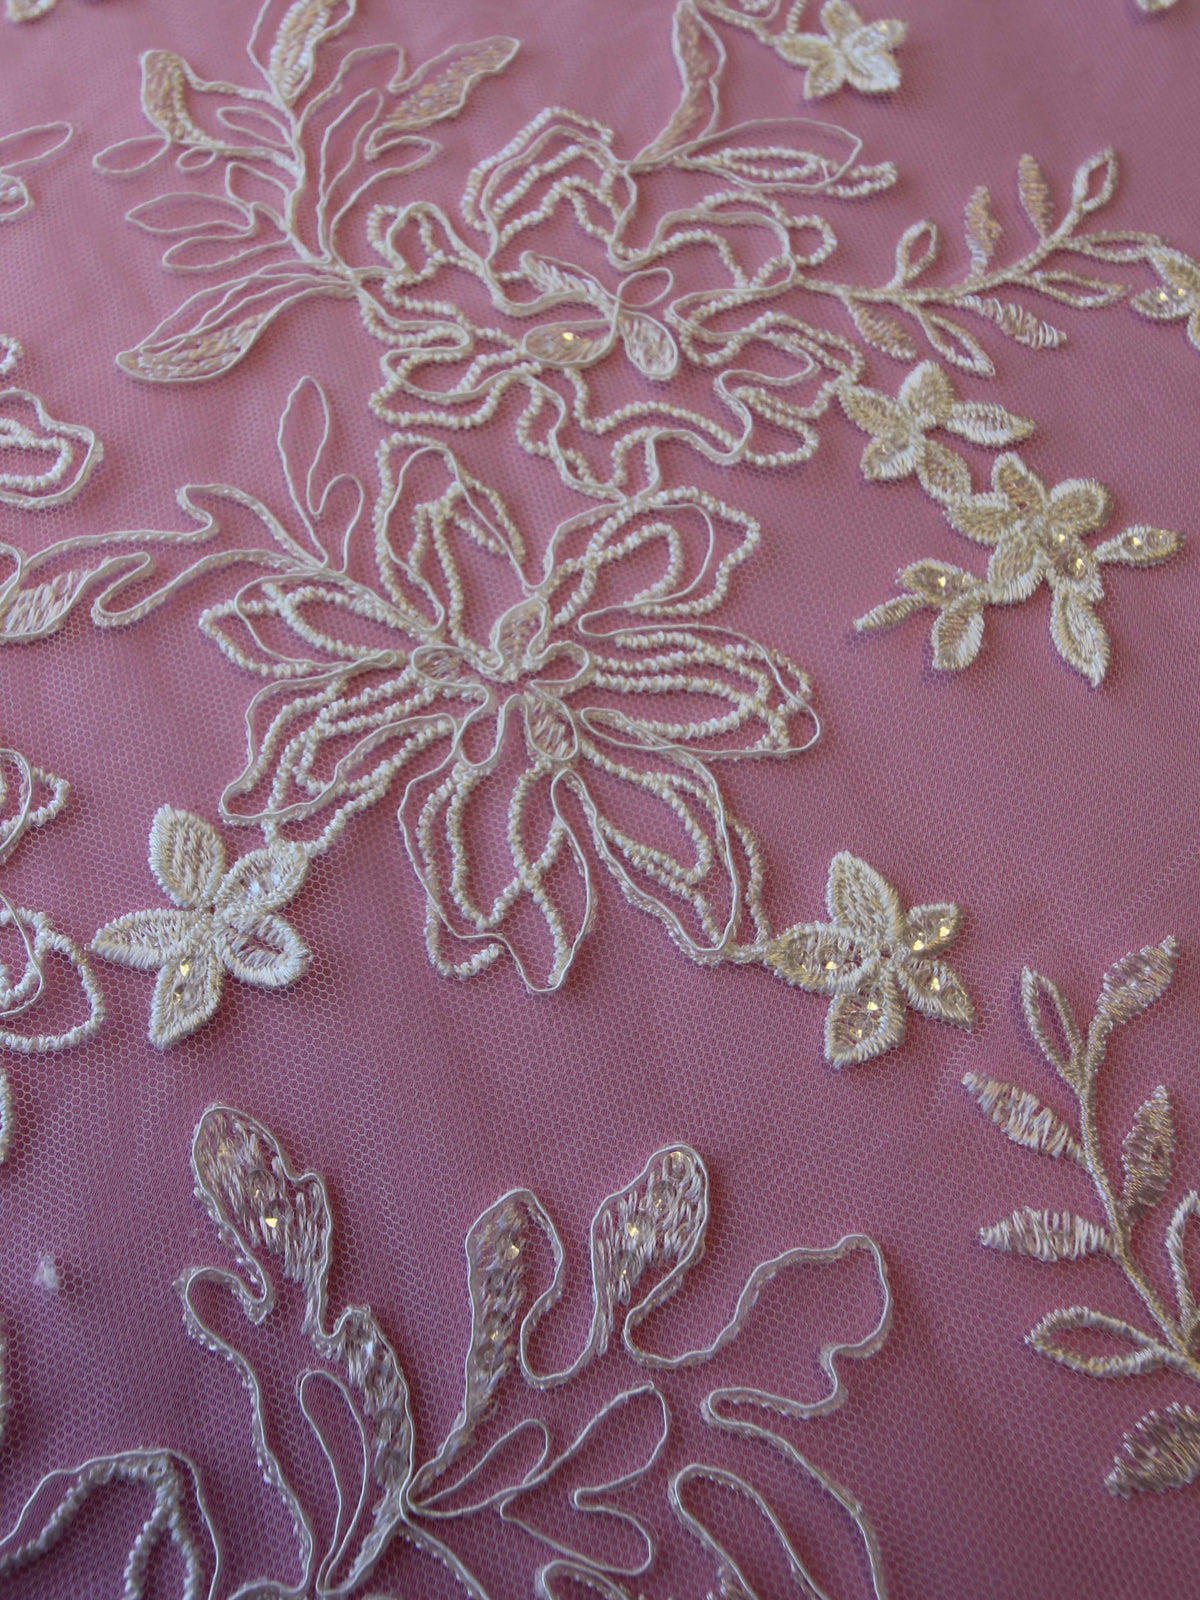 Ivory Corded Embroidery Lace - Calvina